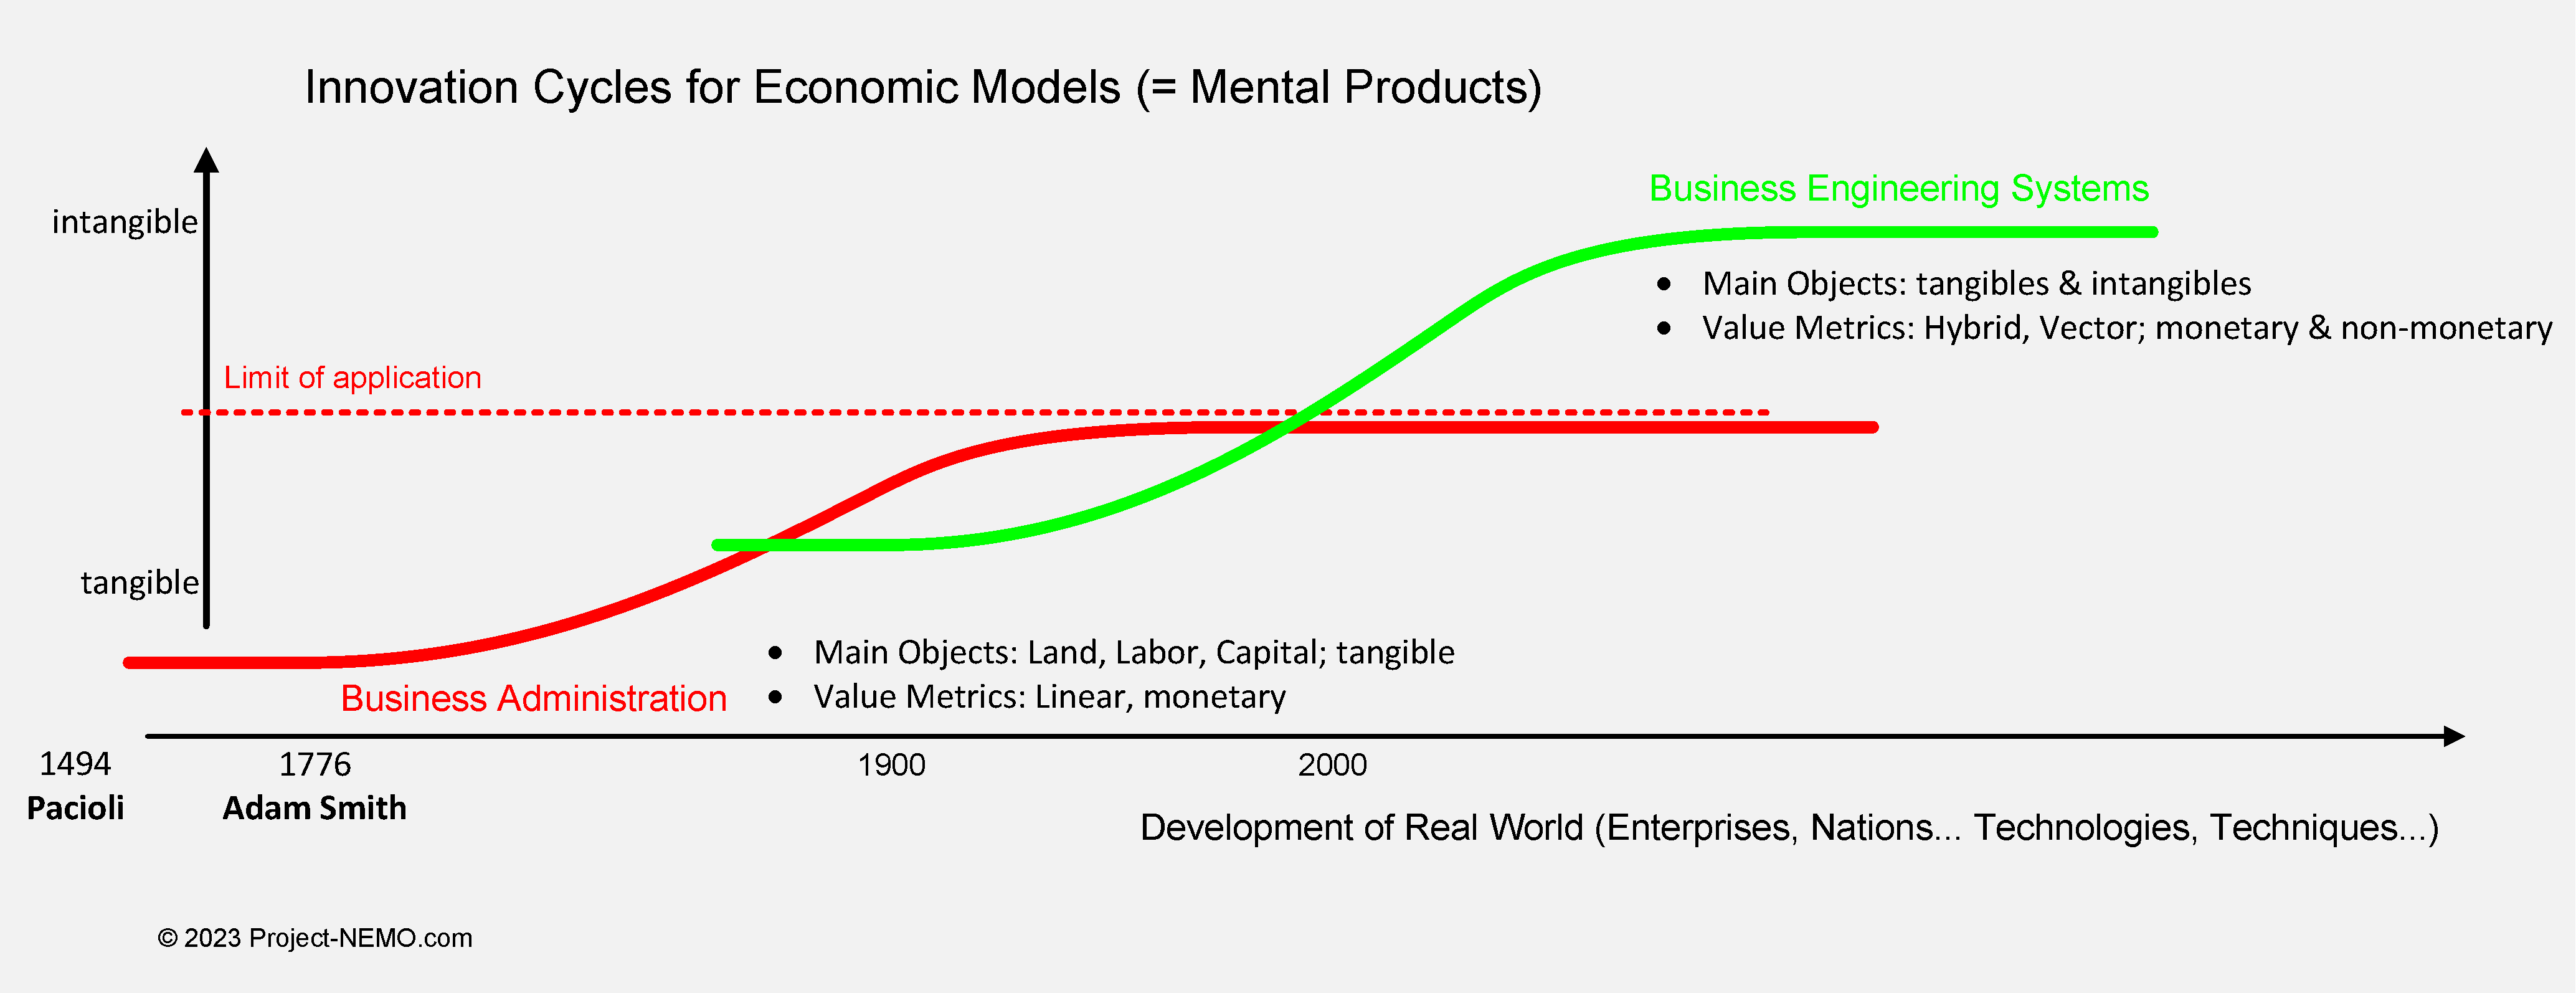 Innovation Cycles for Economic Models